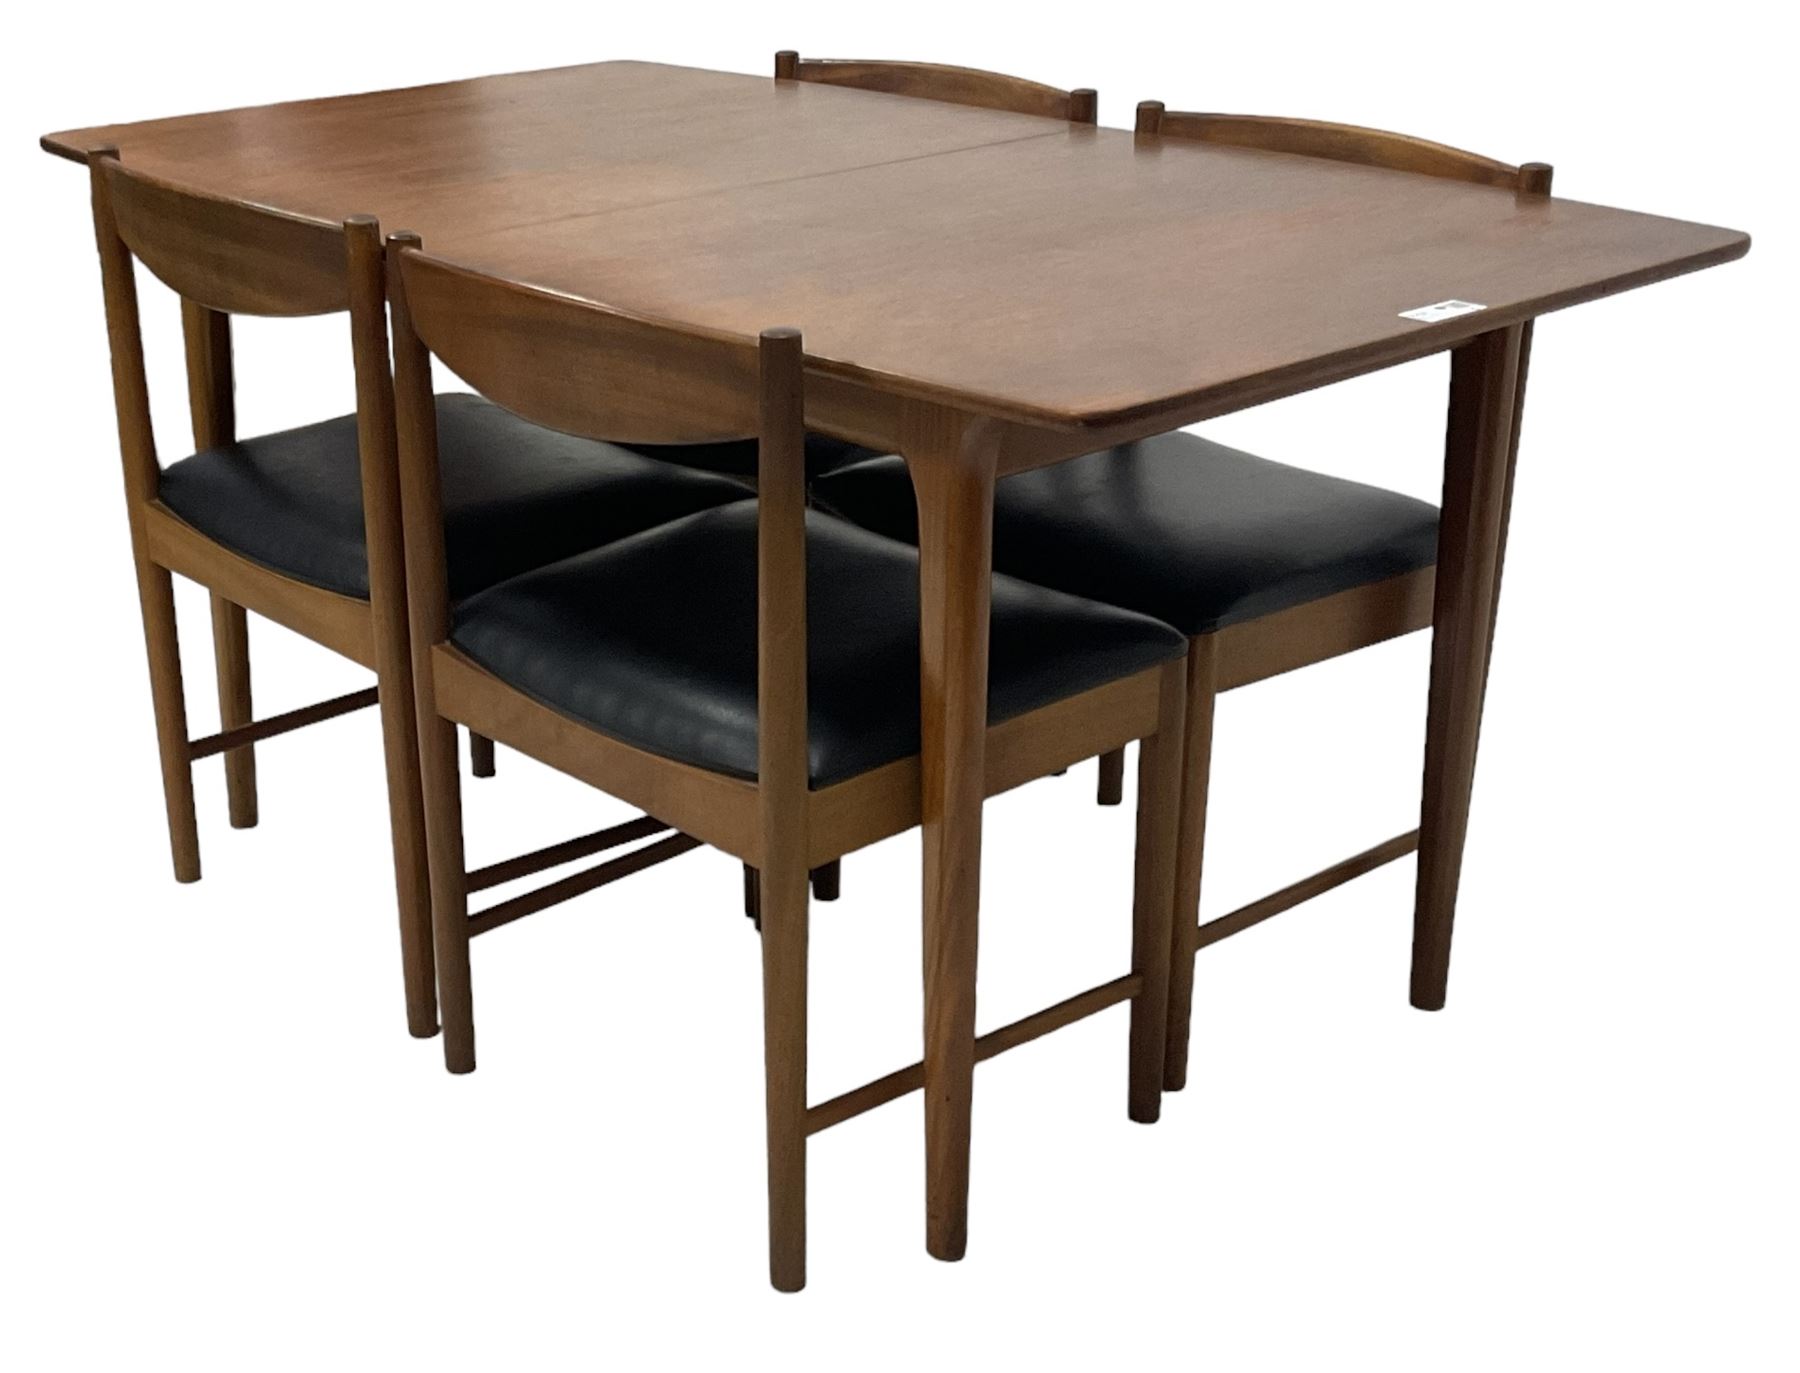 Tom Robertson for AH McIntosh & Co of Kirkaldy - mid-20th century teak extending dining table - Image 2 of 19